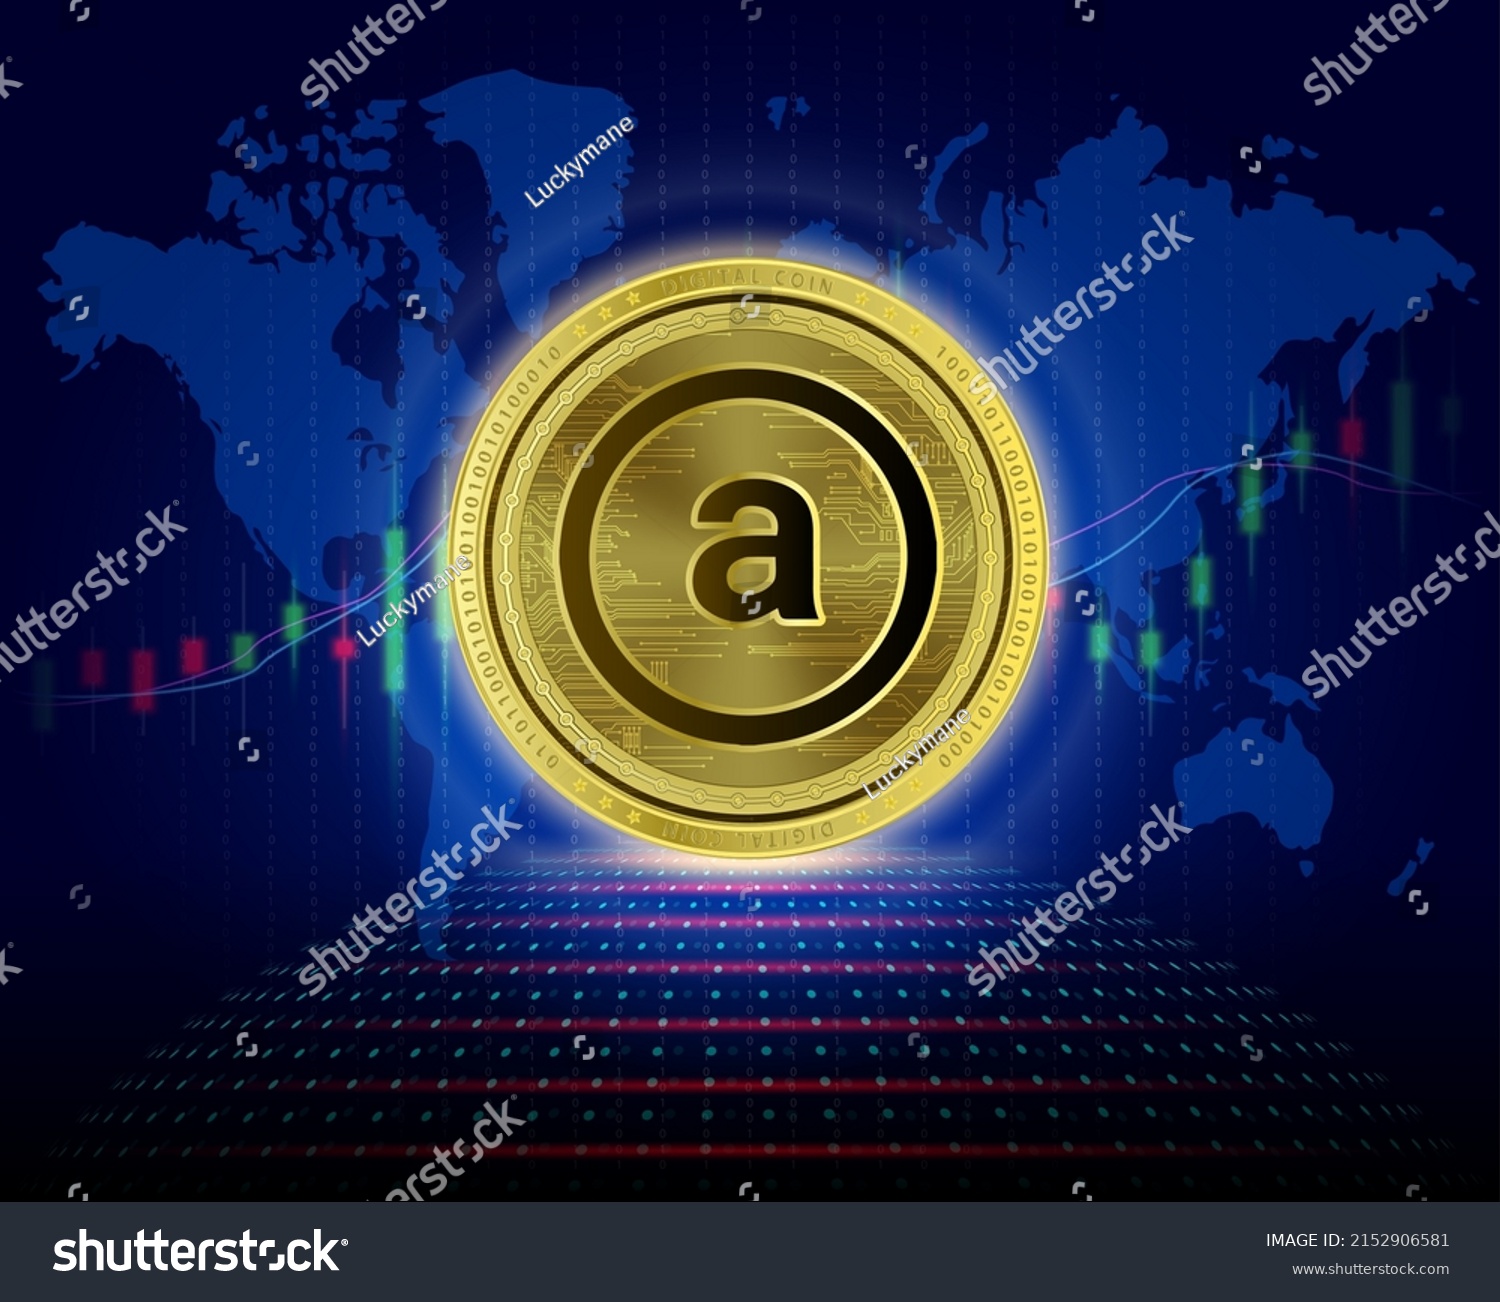 SVG of Arweave (AR) coin. 3D Vector illustration. Cryptocurrency blockchain (crypto currency) Future digital replacement technology. Silver golden virtual currency growth share chart is background. svg